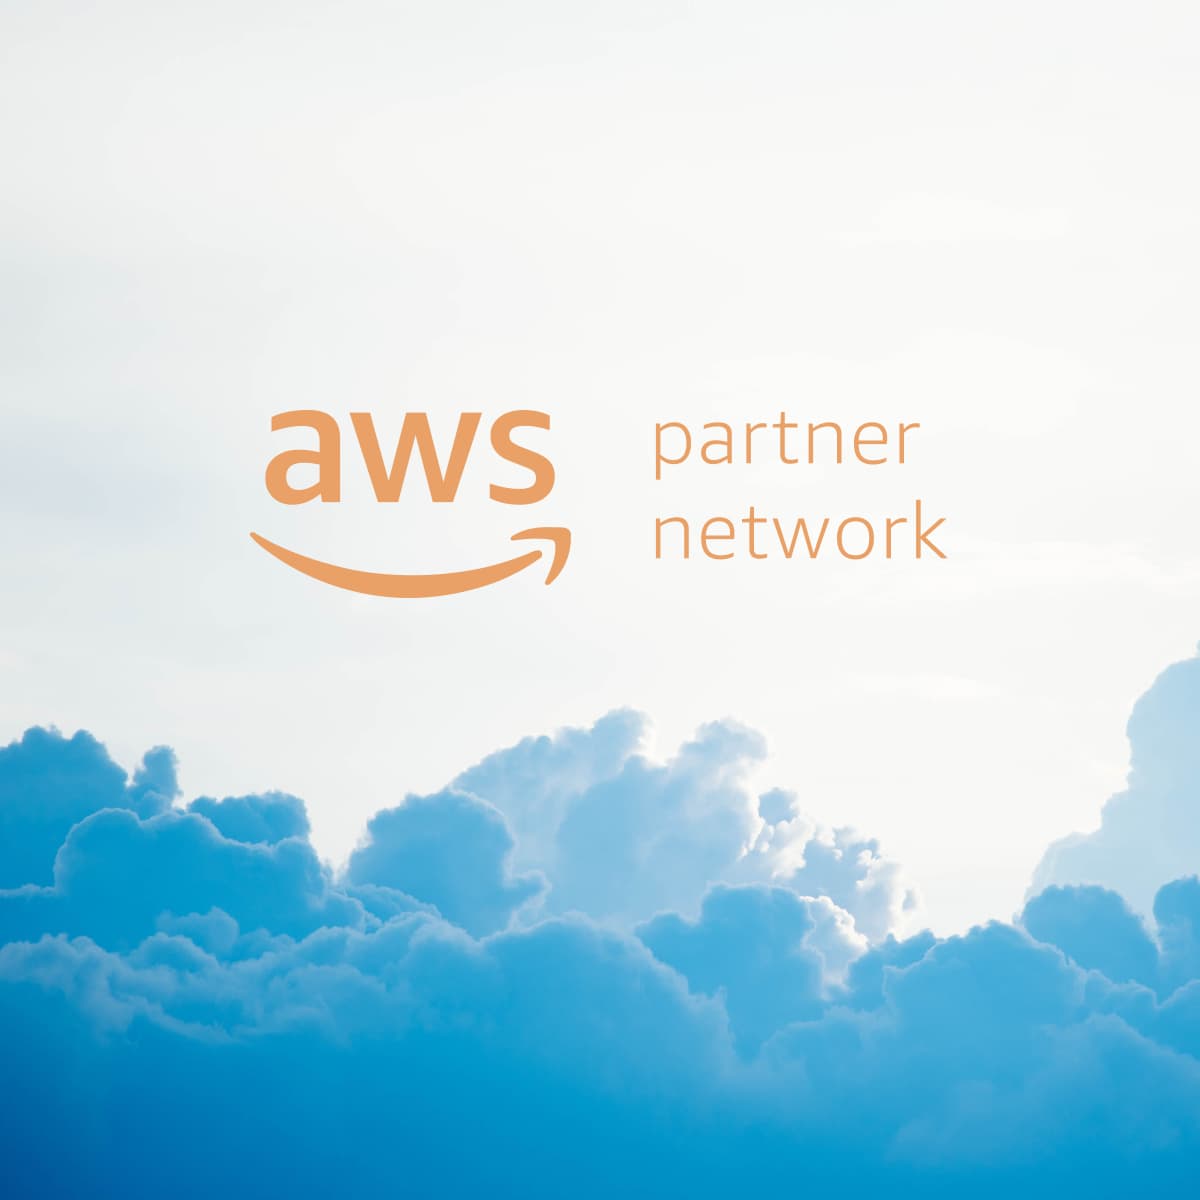 Cynerge Consulting| image: AWS image